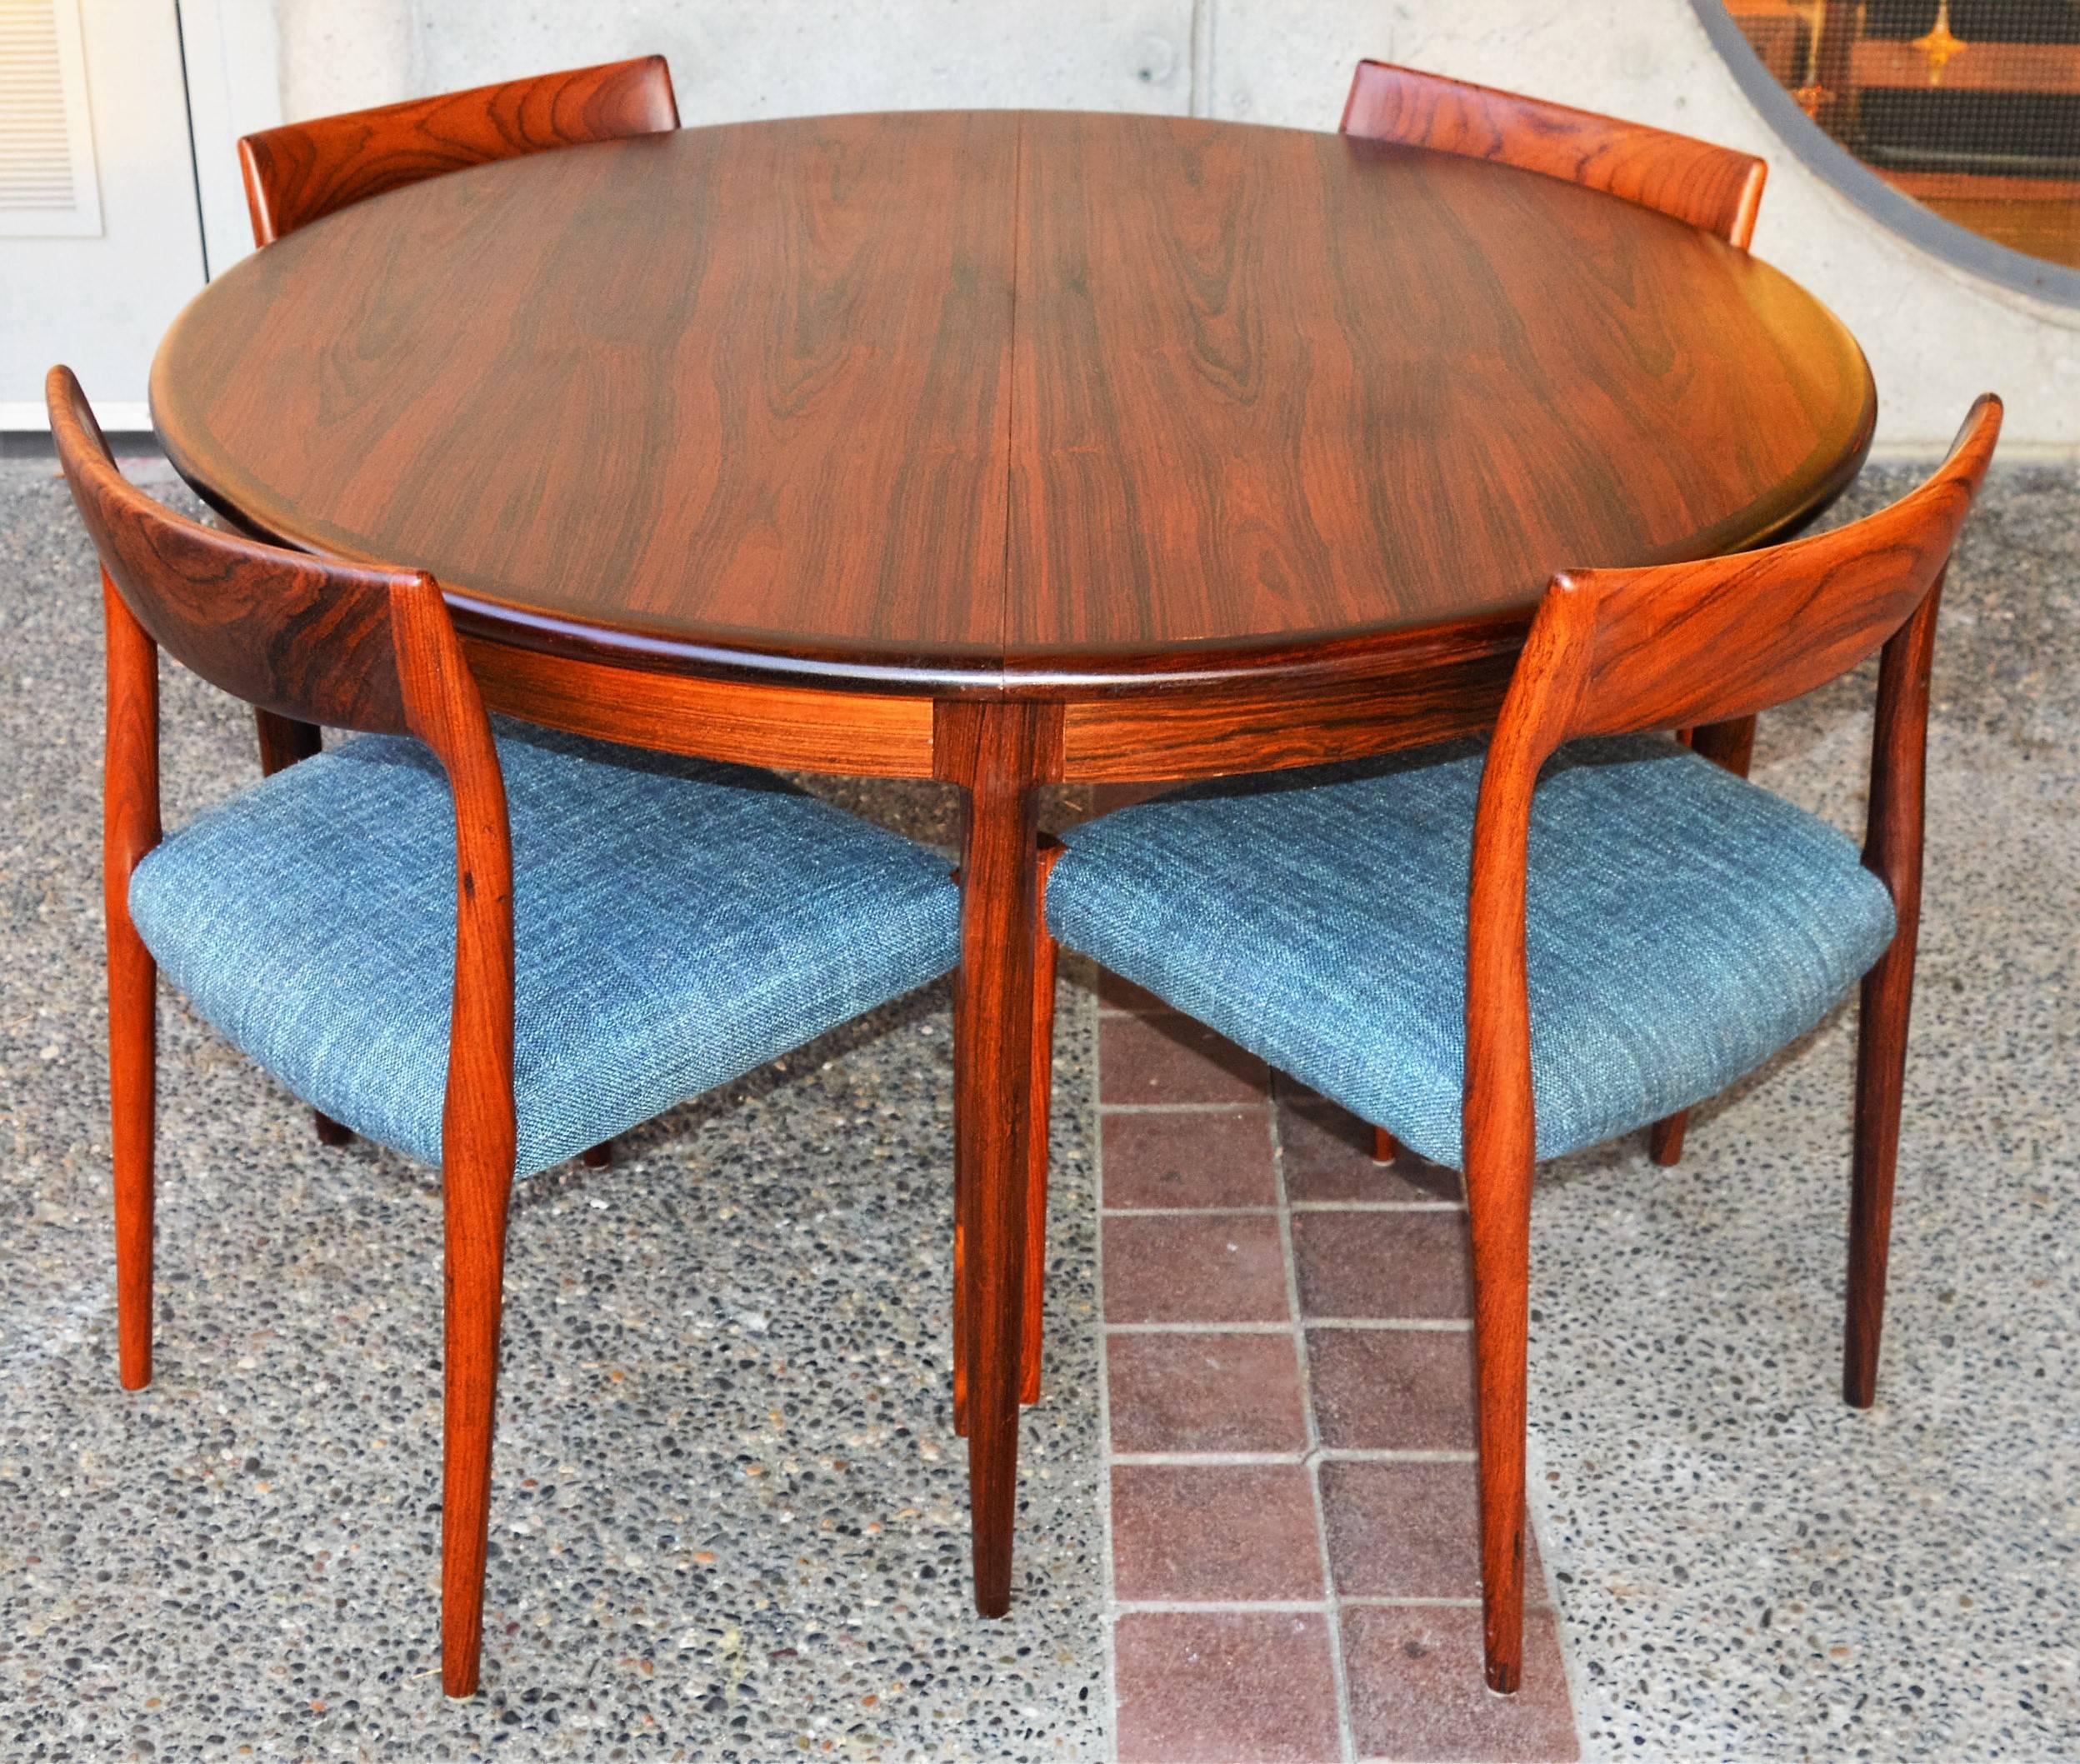 Unique Restored N.O. Moller Rosewood Round One Leaf Dining Table and Six Chairs In Excellent Condition In New Westminster, British Columbia